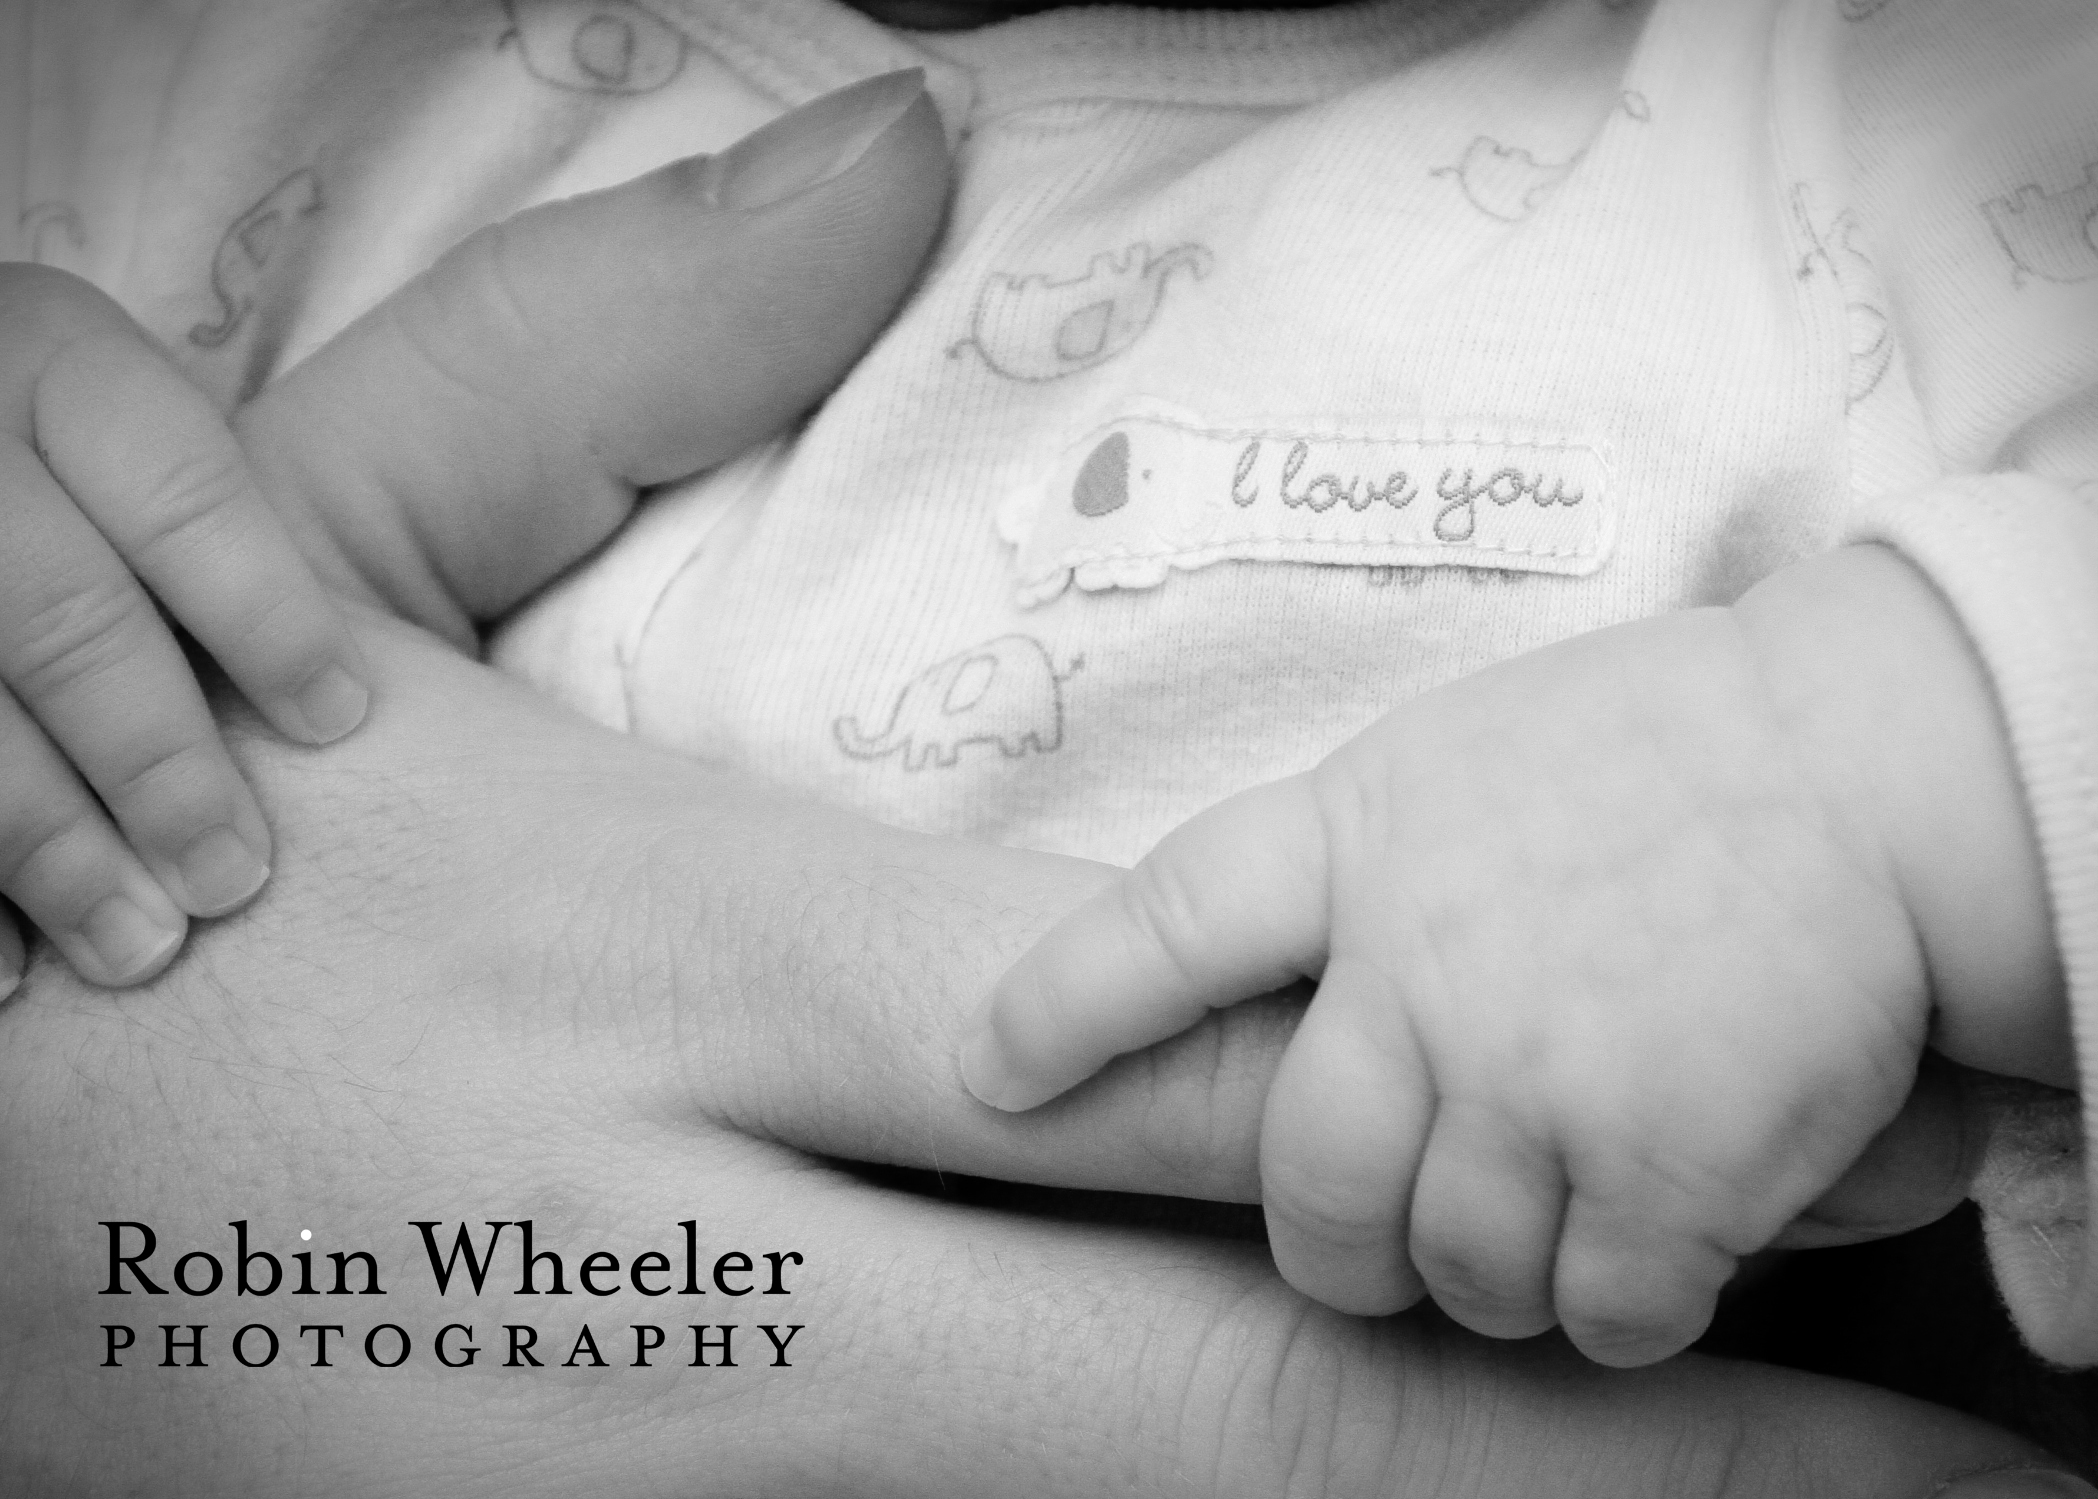 Family portrait of a baby holding her father's hand, Robin Wheeler Photography, Ontario, Oregon